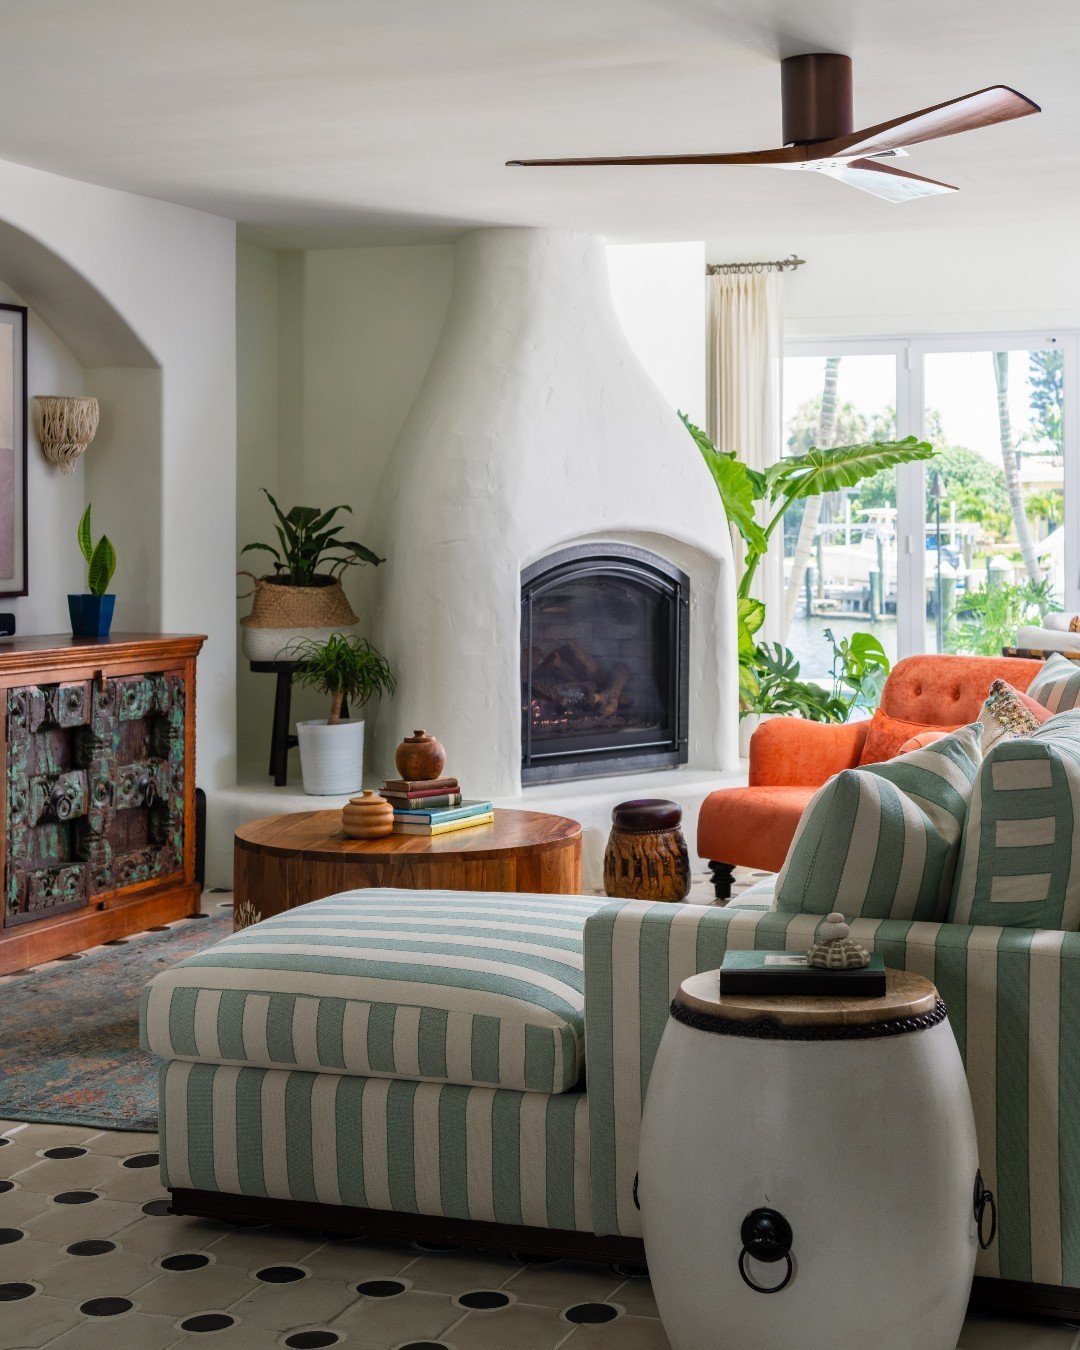 When we were renovating this living room, we had big dreams in mind for what to do about the fireplace. 🧡  Our vision came to life after working with local contractors to create a custom adobe-style fireplace that fit perfectly within the cozy space